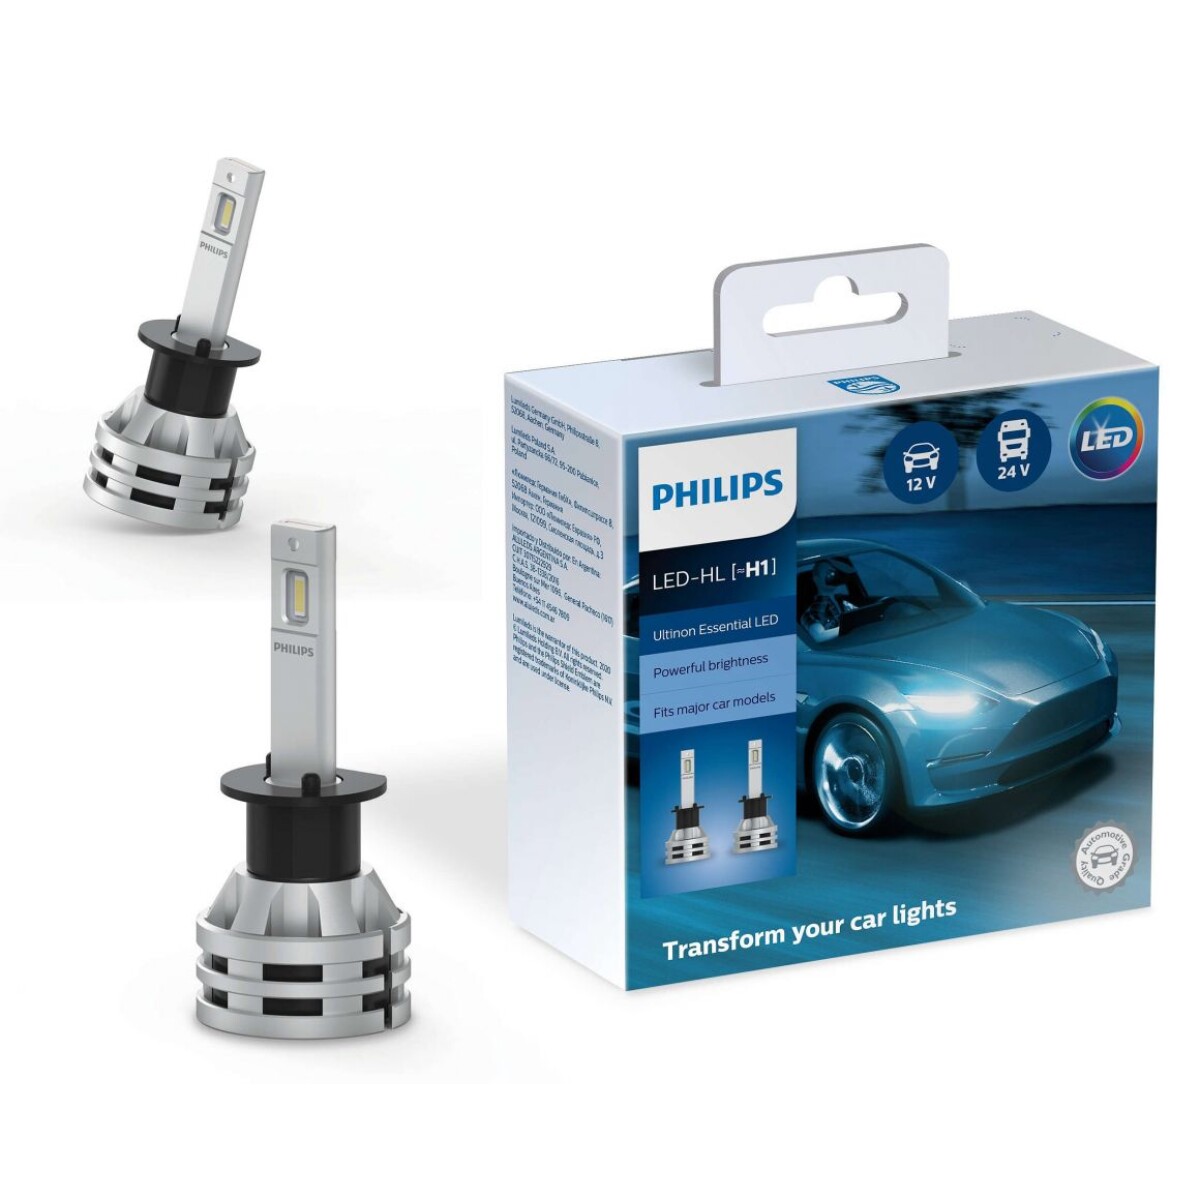 LAMPARA - KIT LED H1 1550LM ULTINON ESSENTIAL PHILIPS 